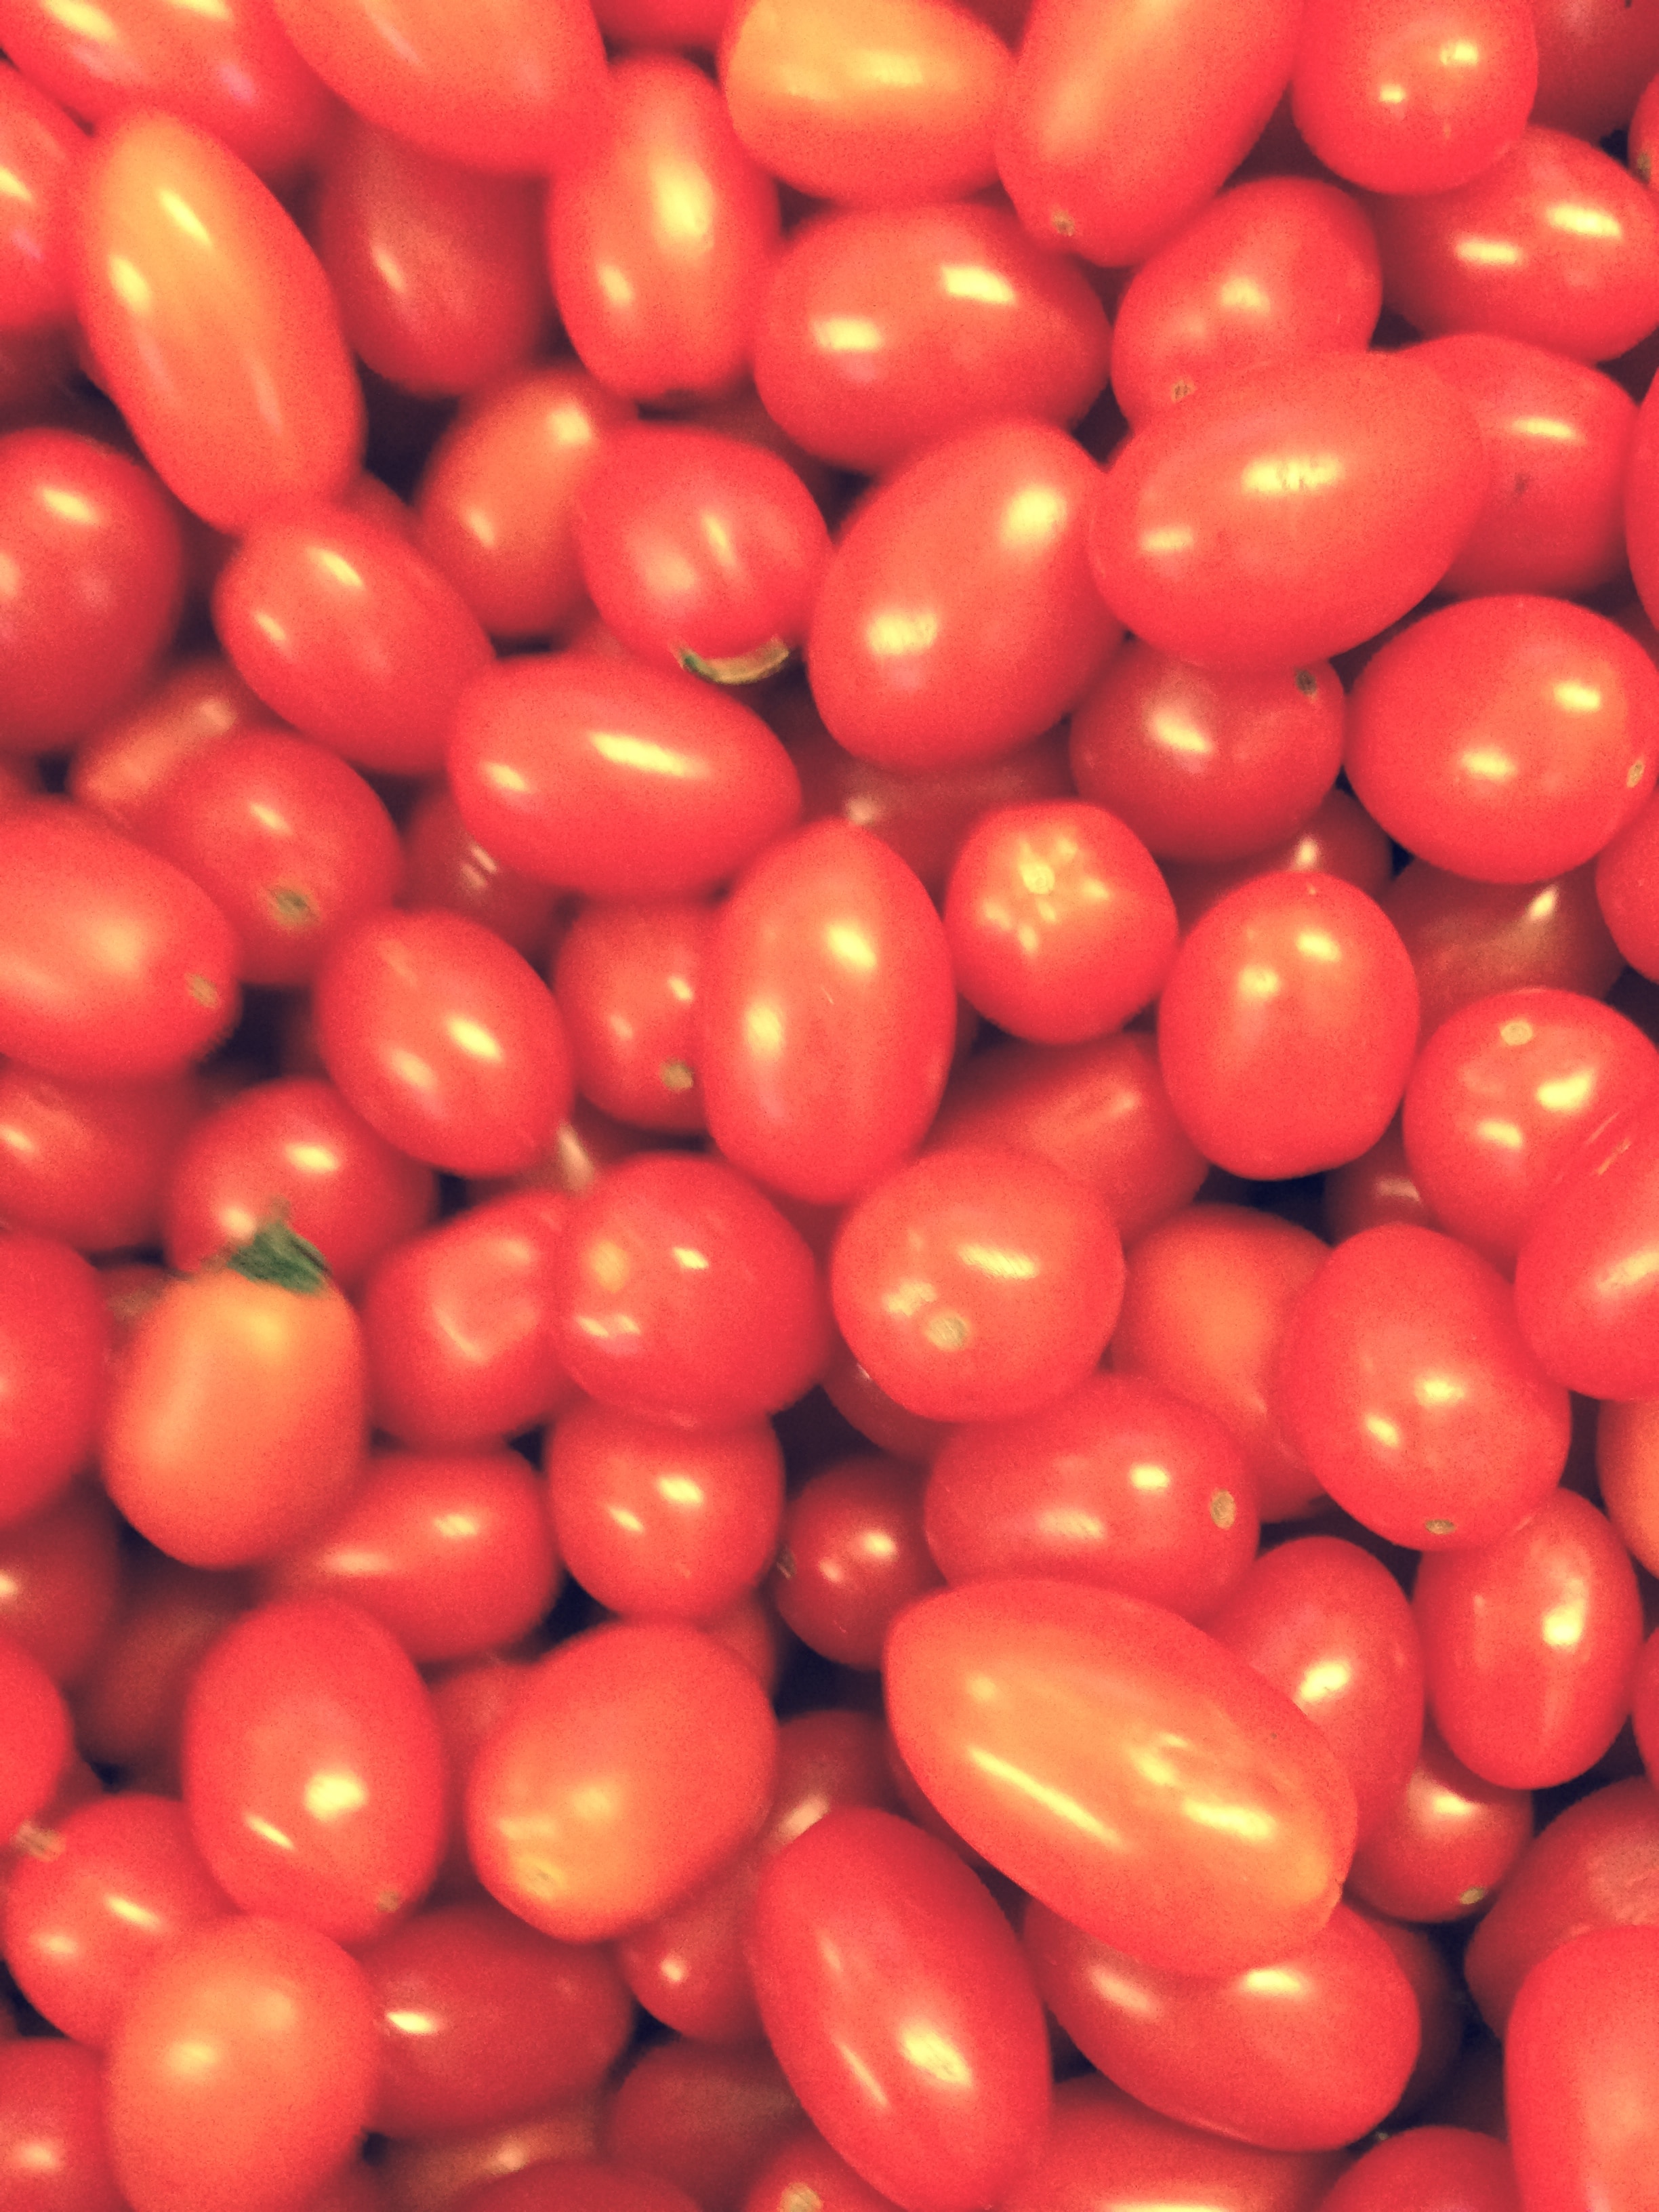 pile of tomatoes